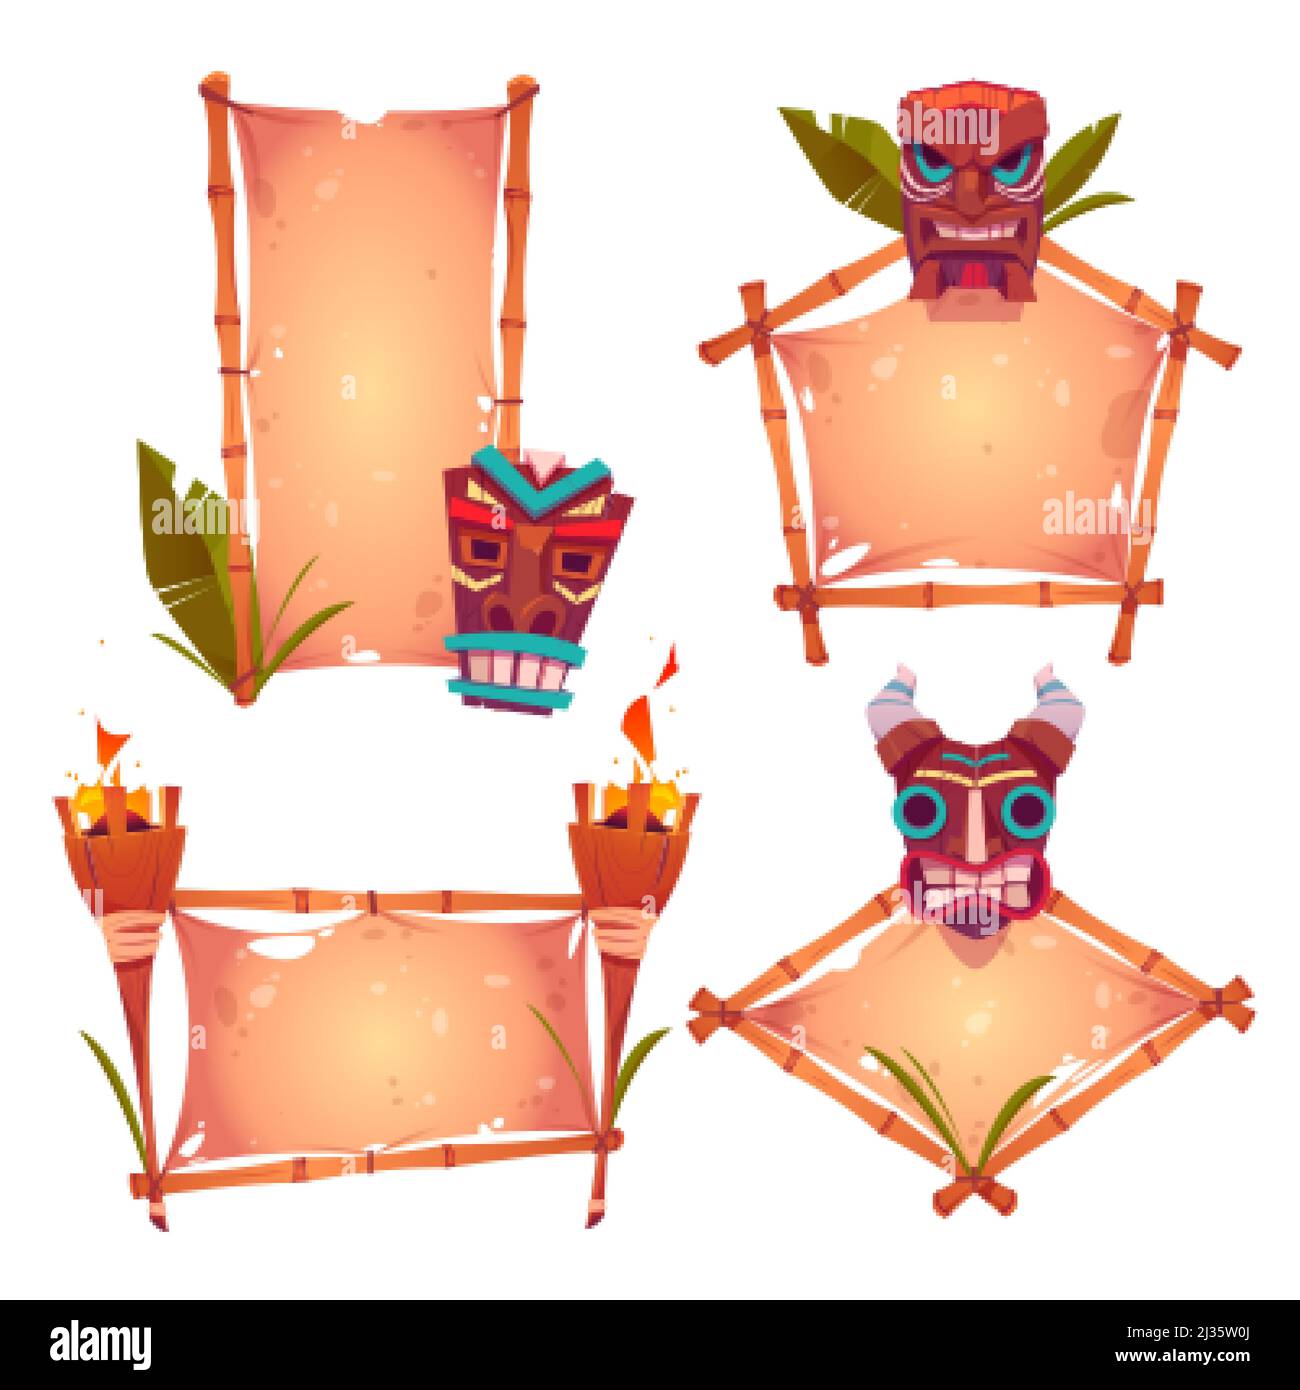 Bamboo frames with tiki masks, old parchment and burning torches, tribal wooden totems, hawaiian or polynesian style borders for hut bar signboard, Ca Stock Vector